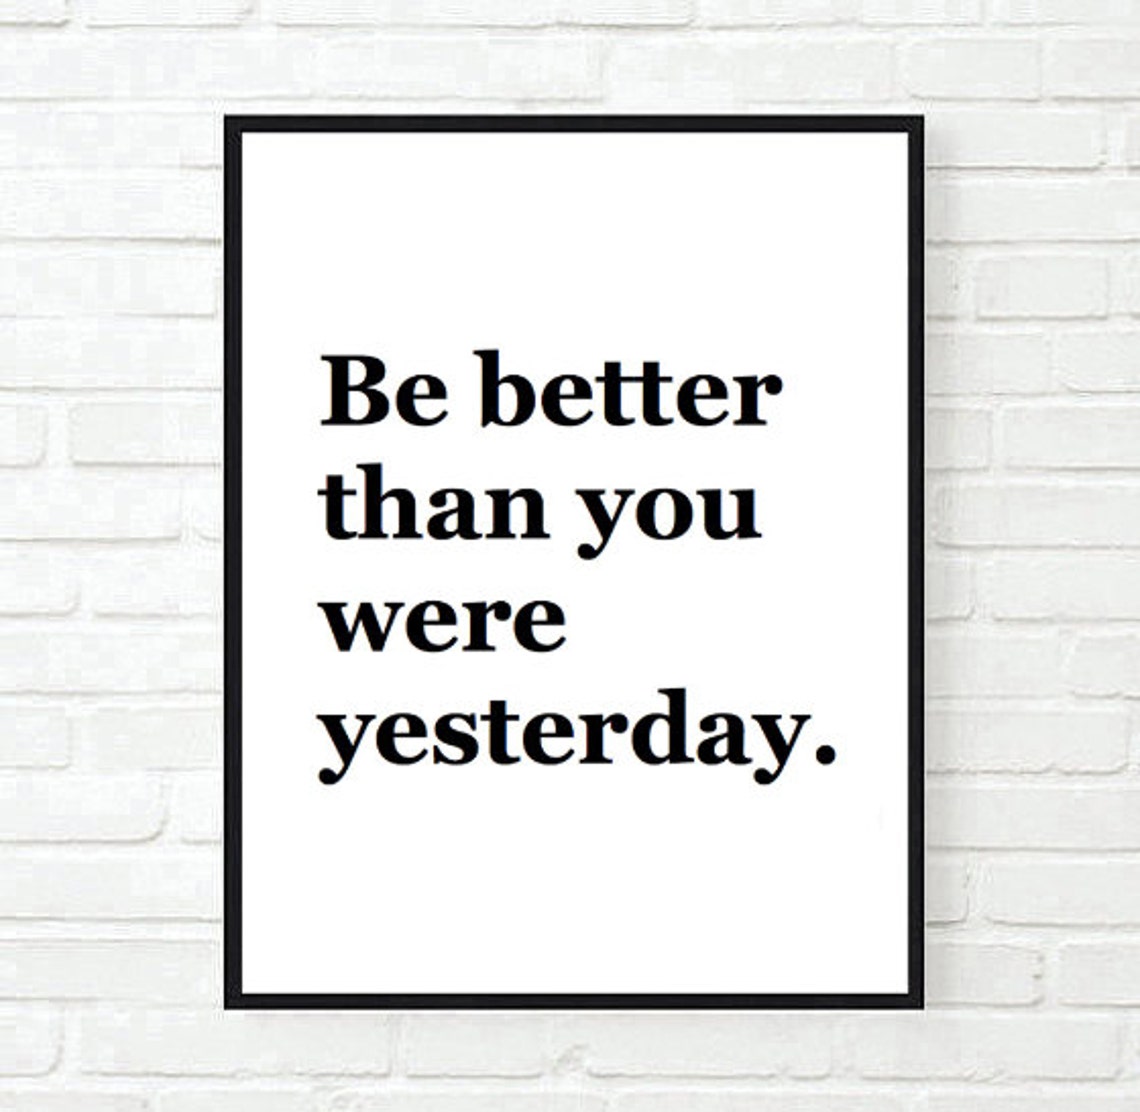 Collection 100+ Images be better than you were yesterday quotes Sharp